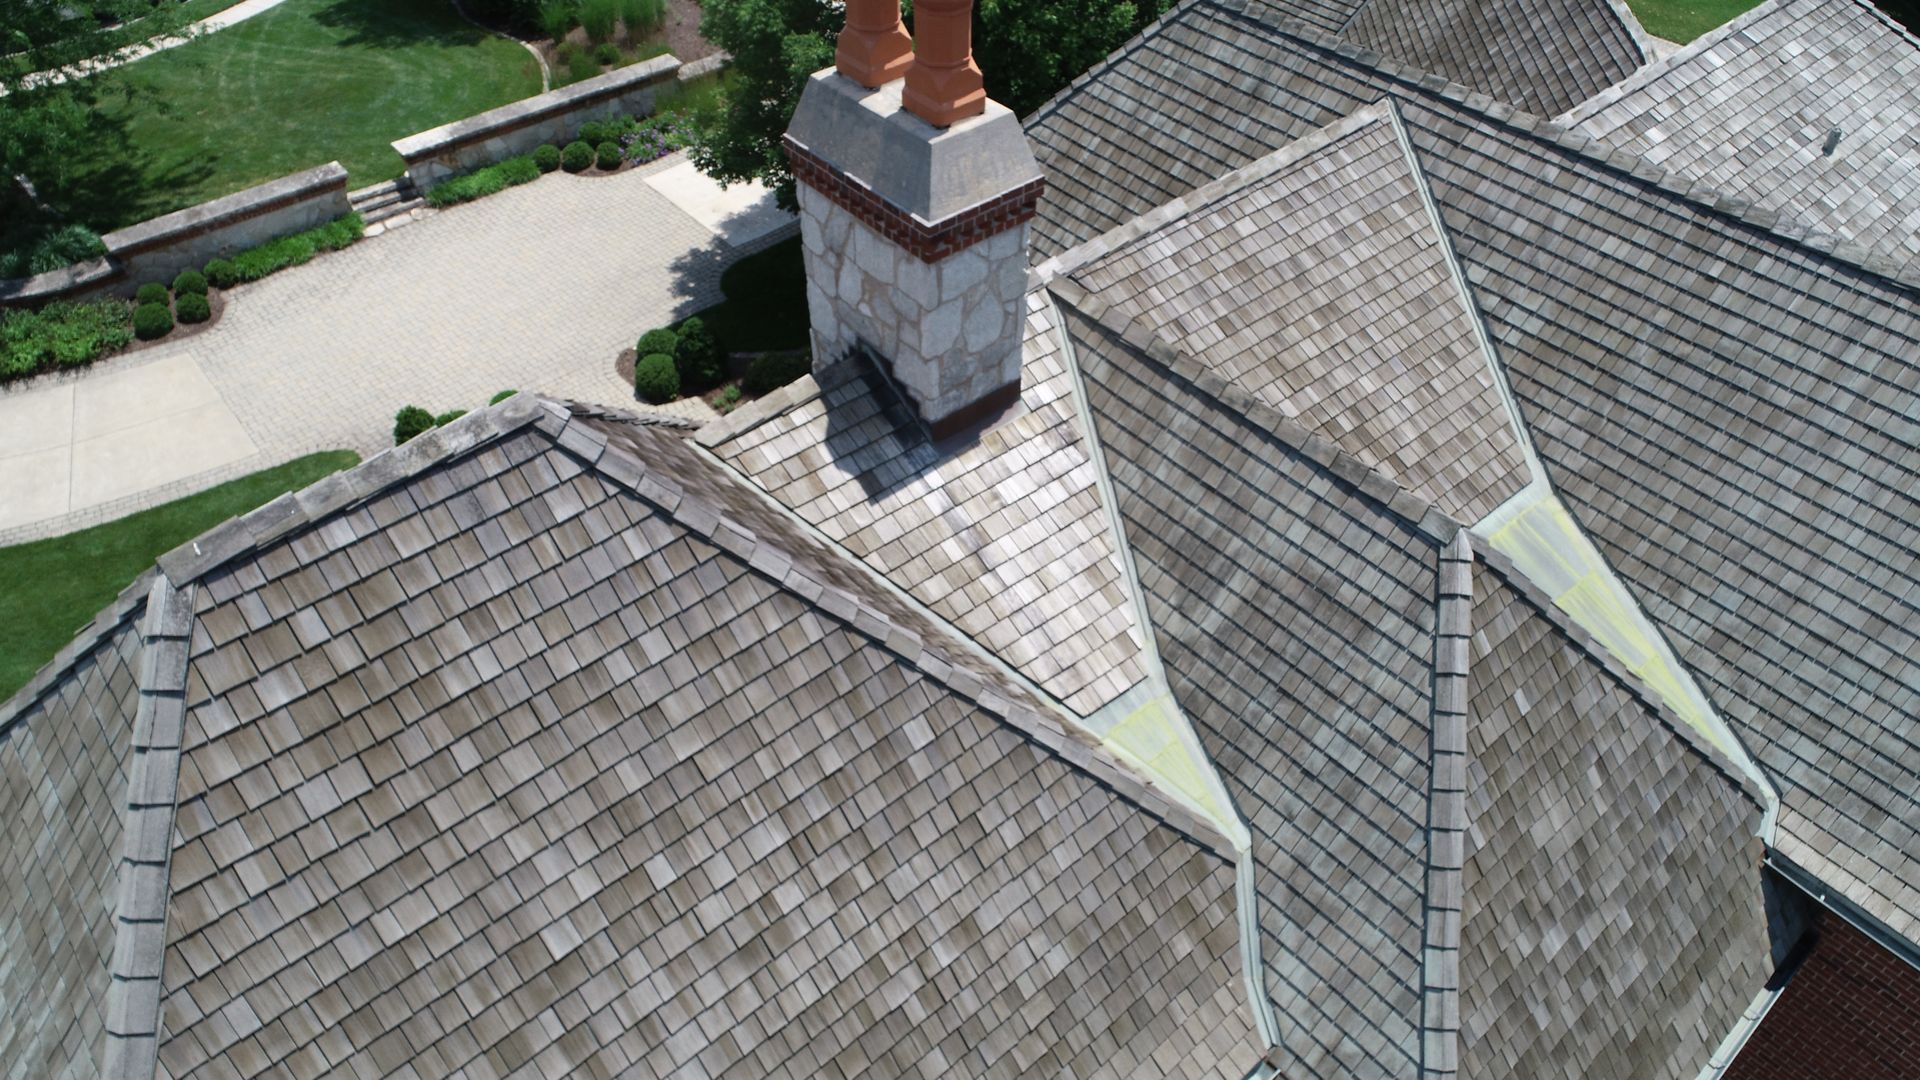 Aerial View of Wood Shake Shingles and Copper Saddles on a Charming Roof Design